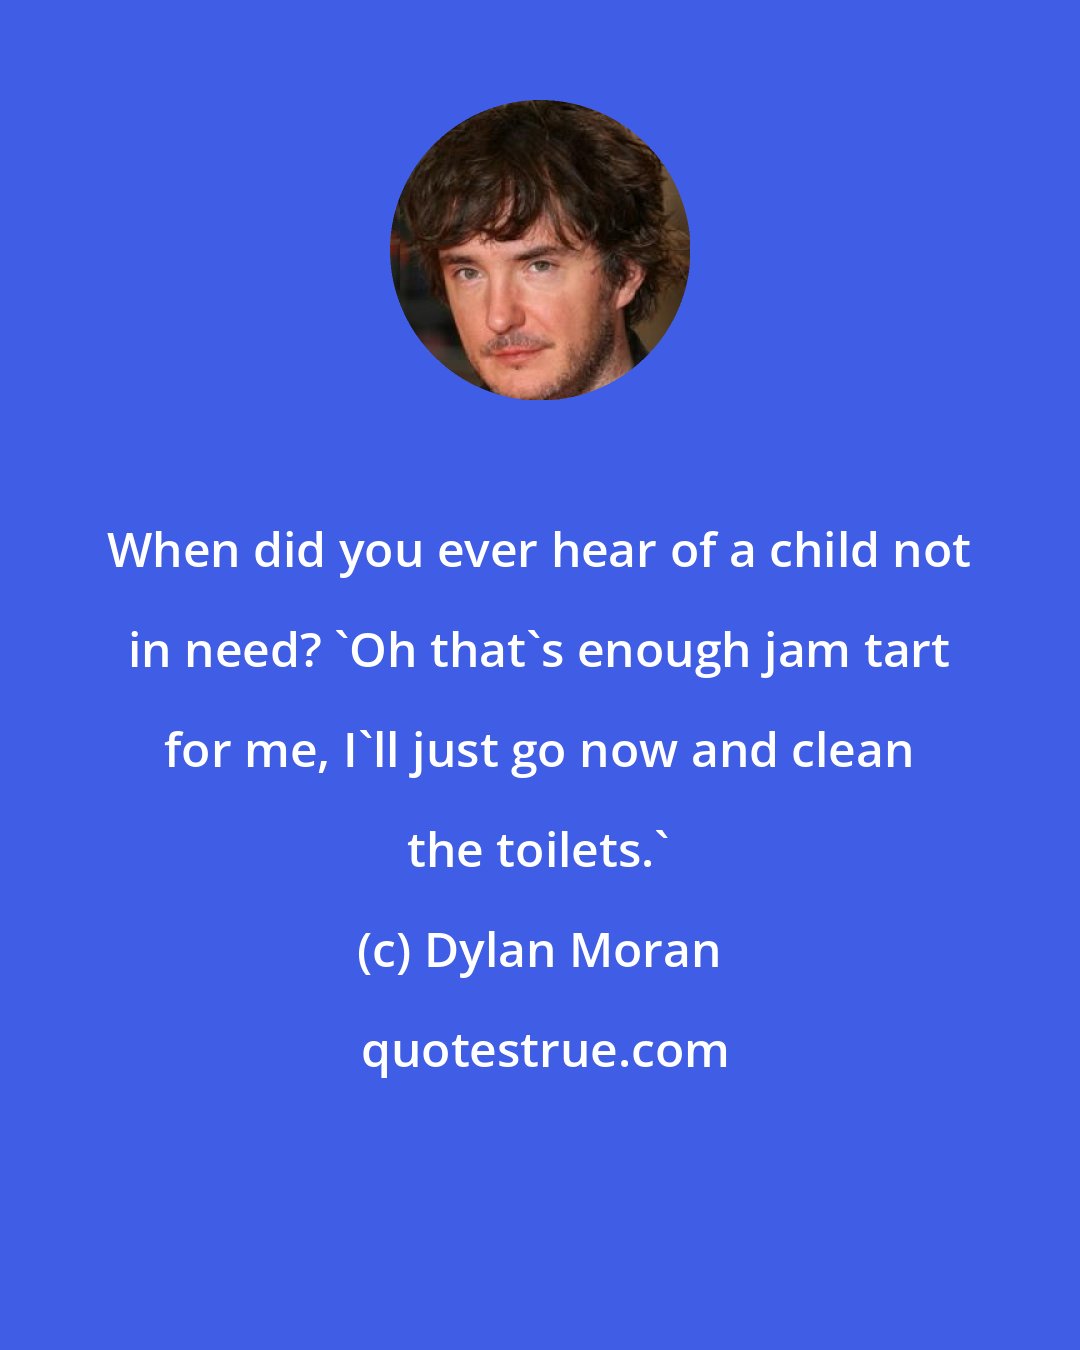 Dylan Moran: When did you ever hear of a child not in need? 'Oh that's enough jam tart for me, I'll just go now and clean the toilets.'